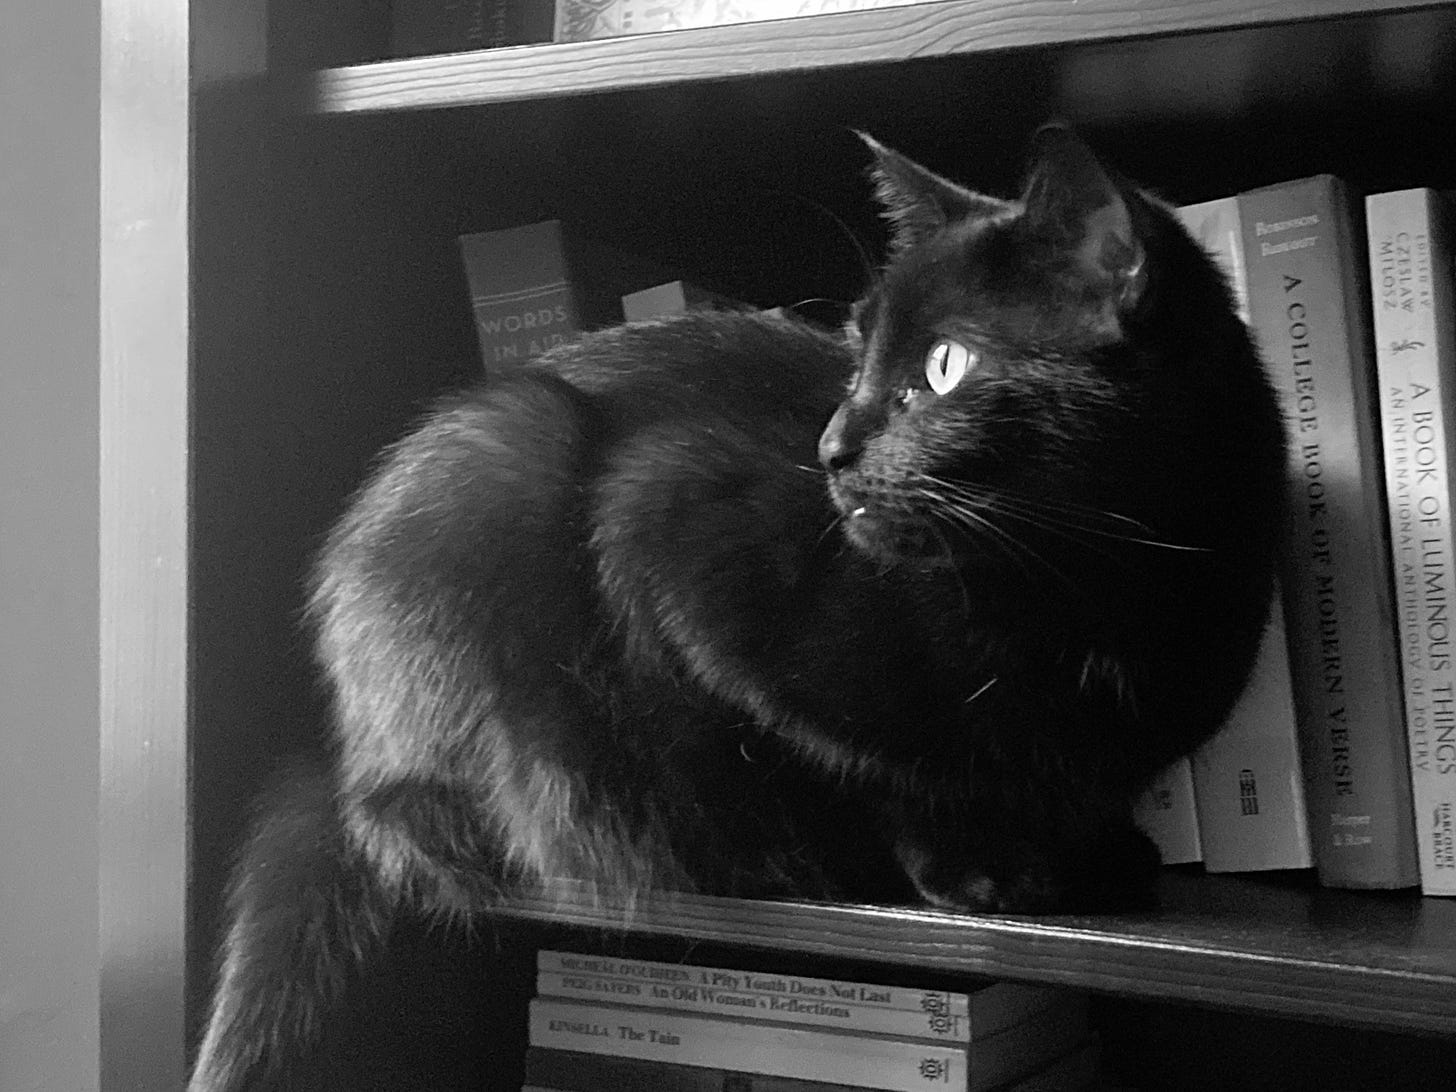 cat sitting on a bookshelf with books of poetry